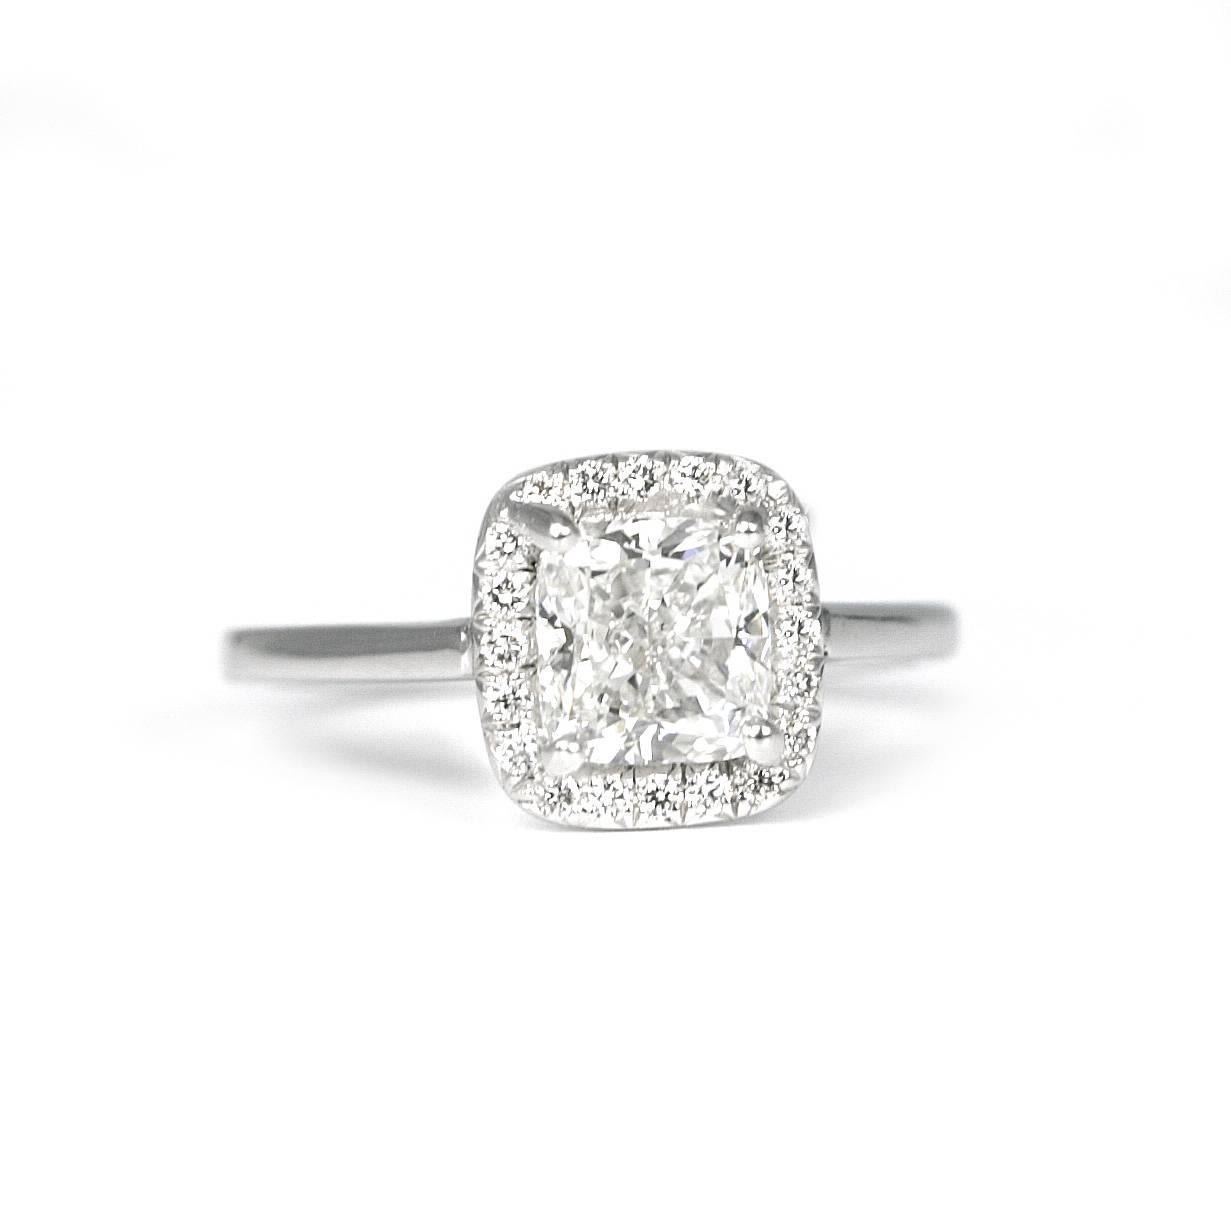 Contemporary 1.50 Carat Cushion Cut Diamond GIA F/VS 2 in a Platinum Halo Ring For Sale